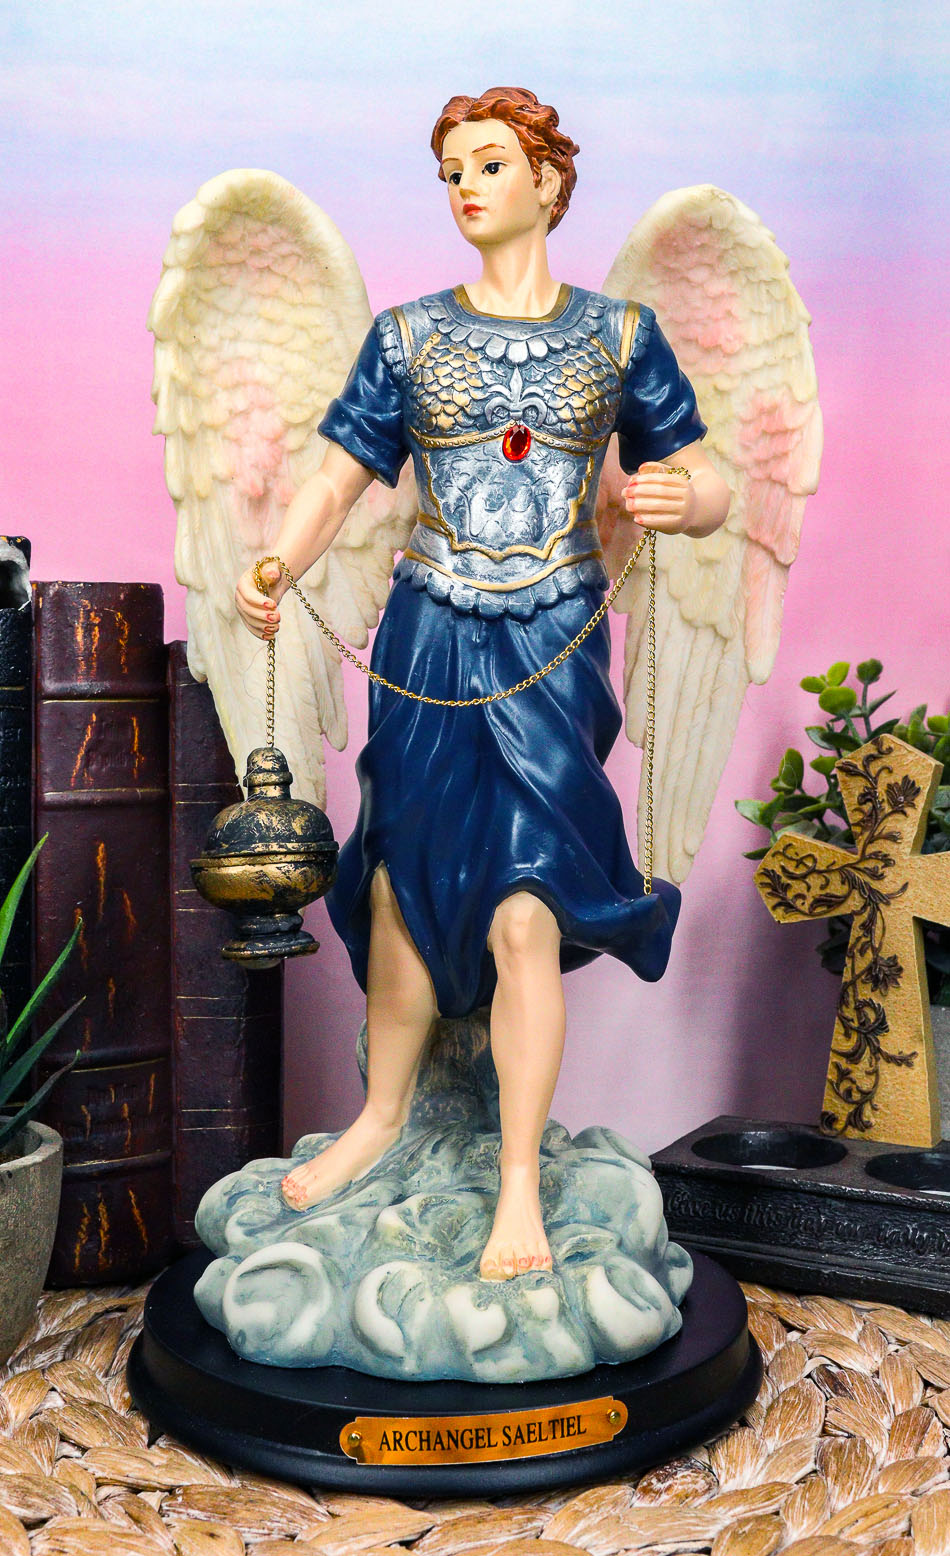 Ebros Byzantine Colorful Archangel Sealtiel Statue with Brass Name Plate 12"H - image 1 of 6